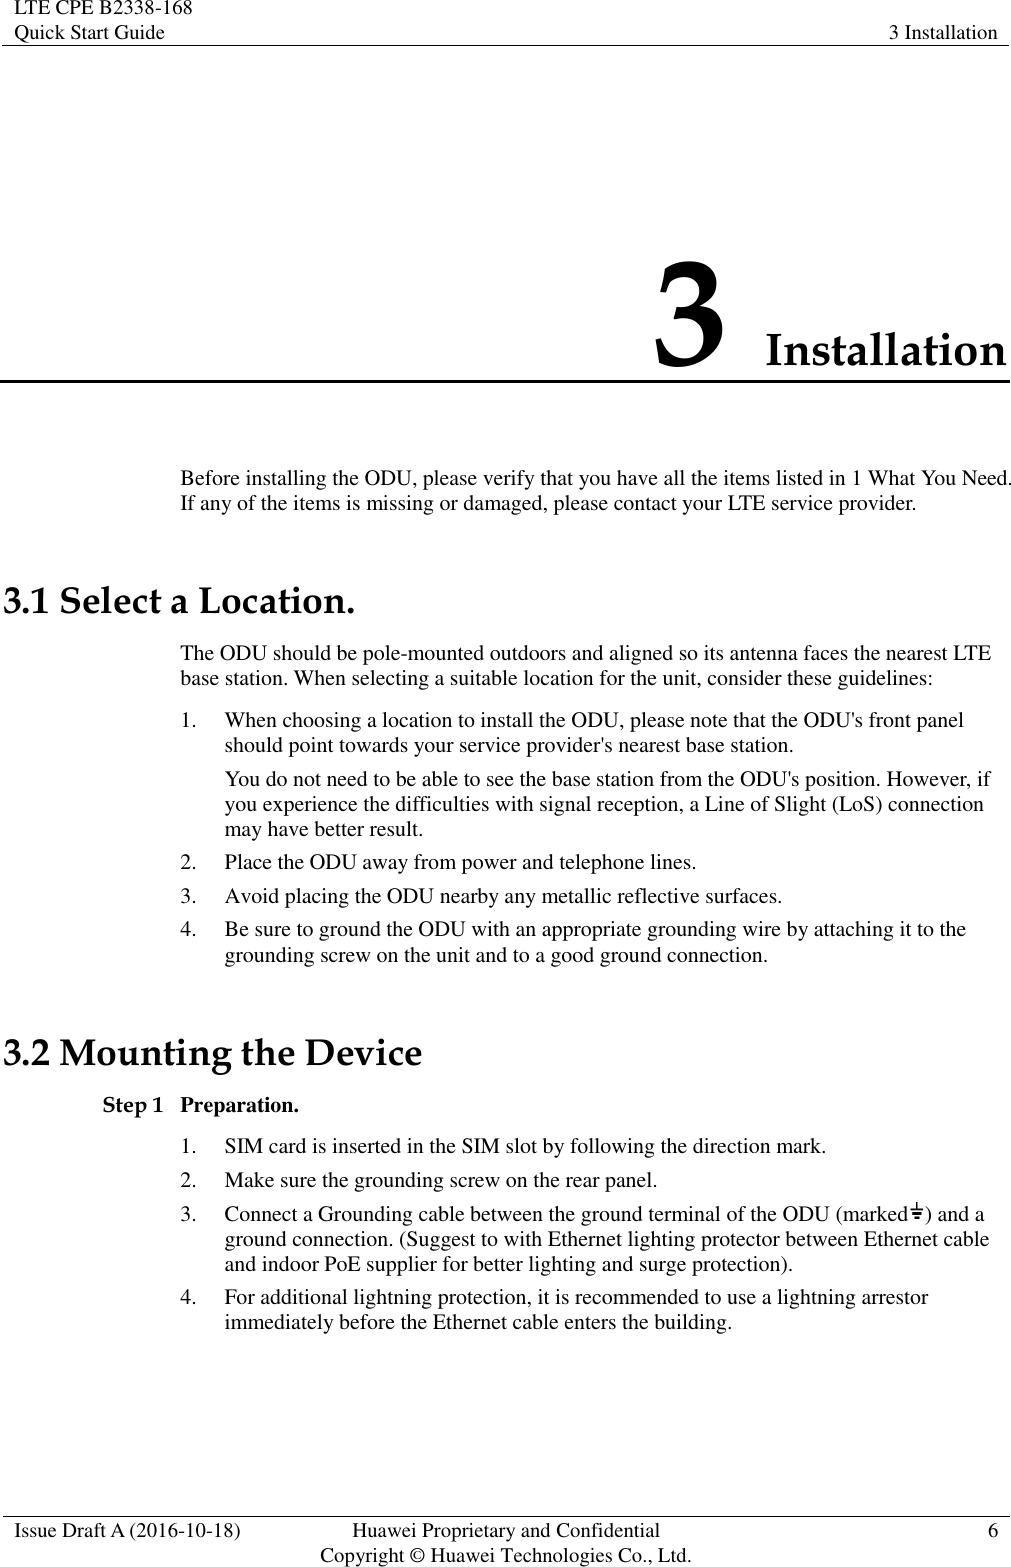 LTE CPE B2338-168   Quick Start Guide 3 Installation  Issue Draft A (2016-10-18) Huawei Proprietary and Confidential                                     Copyright ©  Huawei Technologies Co., Ltd. 6  3 Installation Before installing the ODU, please verify that you have all the items listed in 1 What You Need. If any of the items is missing or damaged, please contact your LTE service provider. 3.1 Select a Location. The ODU should be pole-mounted outdoors and aligned so its antenna faces the nearest LTE base station. When selecting a suitable location for the unit, consider these guidelines: 1. When choosing a location to install the ODU, please note that the ODU&apos;s front panel should point towards your service provider&apos;s nearest base station. You do not need to be able to see the base station from the ODU&apos;s position. However, if you experience the difficulties with signal reception, a Line of Slight (LoS) connection may have better result. 2. Place the ODU away from power and telephone lines. 3. Avoid placing the ODU nearby any metallic reflective surfaces. 4. Be sure to ground the ODU with an appropriate grounding wire by attaching it to the grounding screw on the unit and to a good ground connection. 3.2 Mounting the Device Step 1 Preparation. 1. SIM card is inserted in the SIM slot by following the direction mark. 2. Make sure the grounding screw on the rear panel. 3. Connect a Grounding cable between the ground terminal of the ODU (marked ) and a ground connection. (Suggest to with Ethernet lighting protector between Ethernet cable and indoor PoE supplier for better lighting and surge protection). 4. For additional lightning protection, it is recommended to use a lightning arrestor immediately before the Ethernet cable enters the building. 